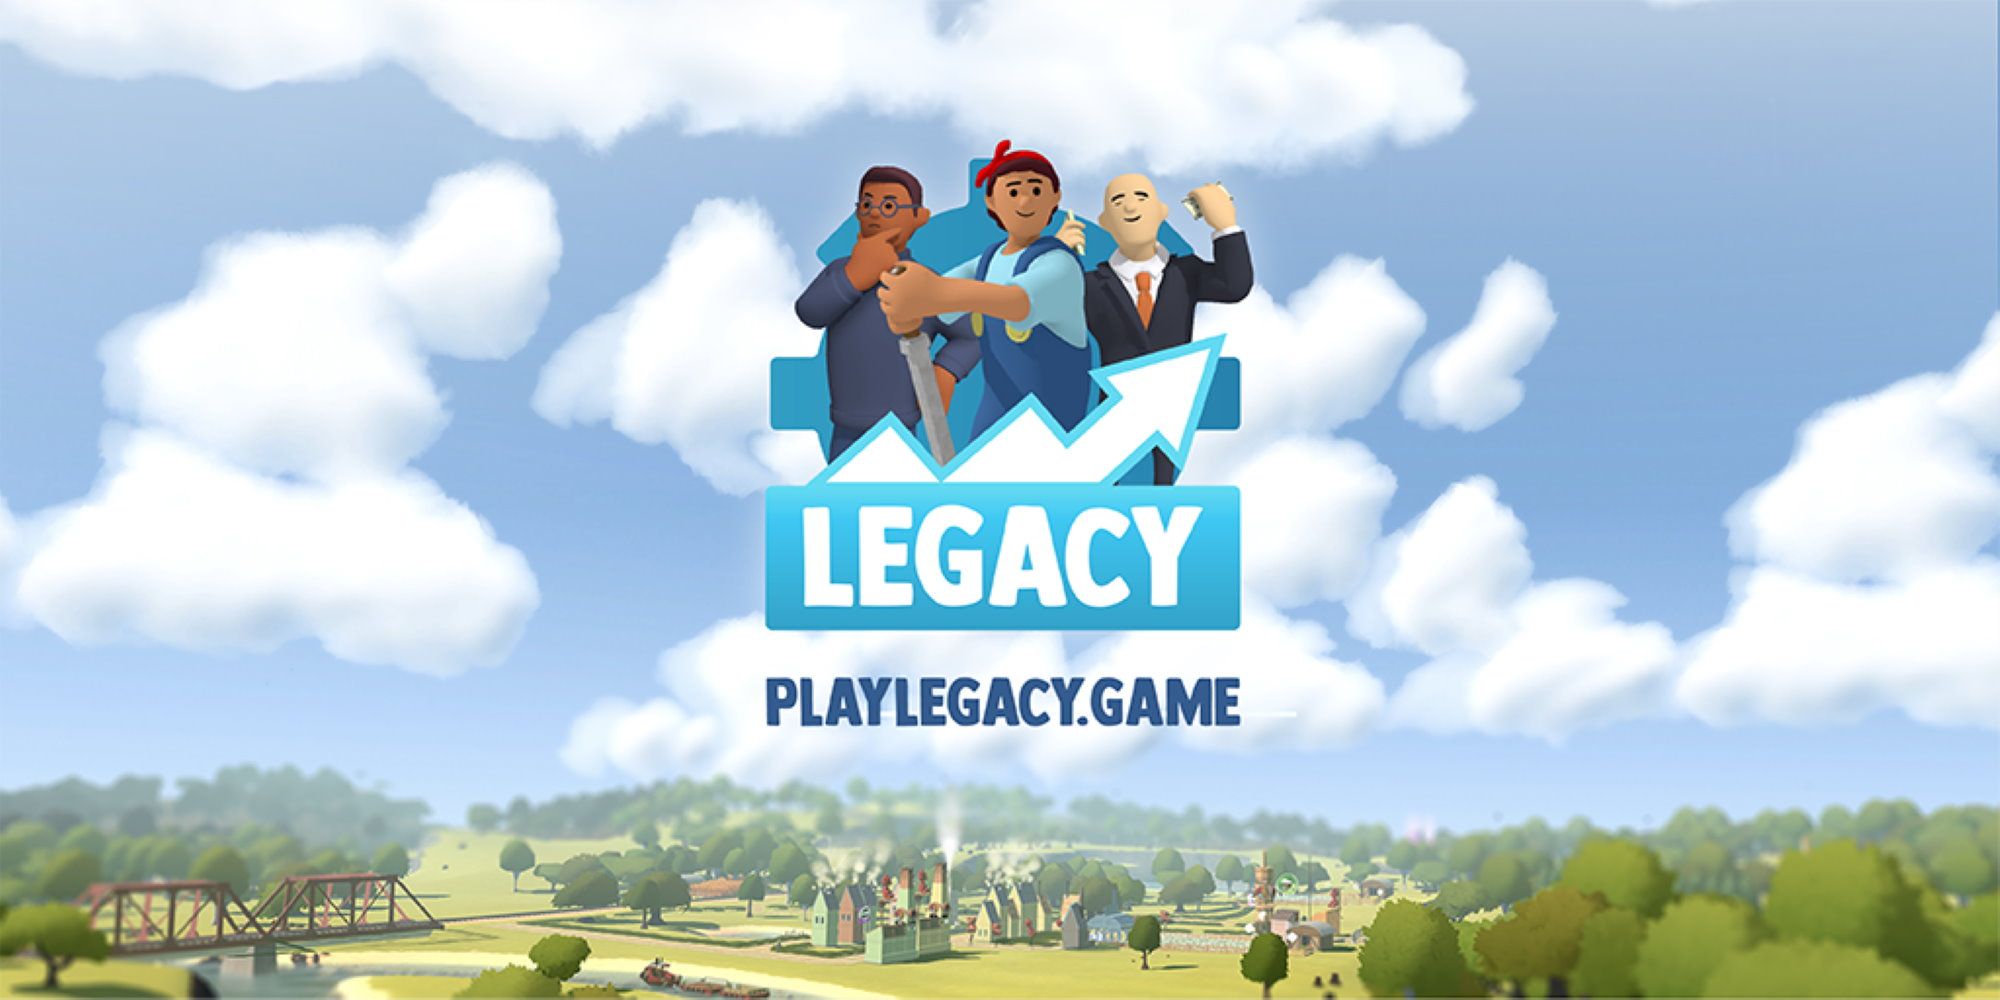 Play Legacy - via 22cans